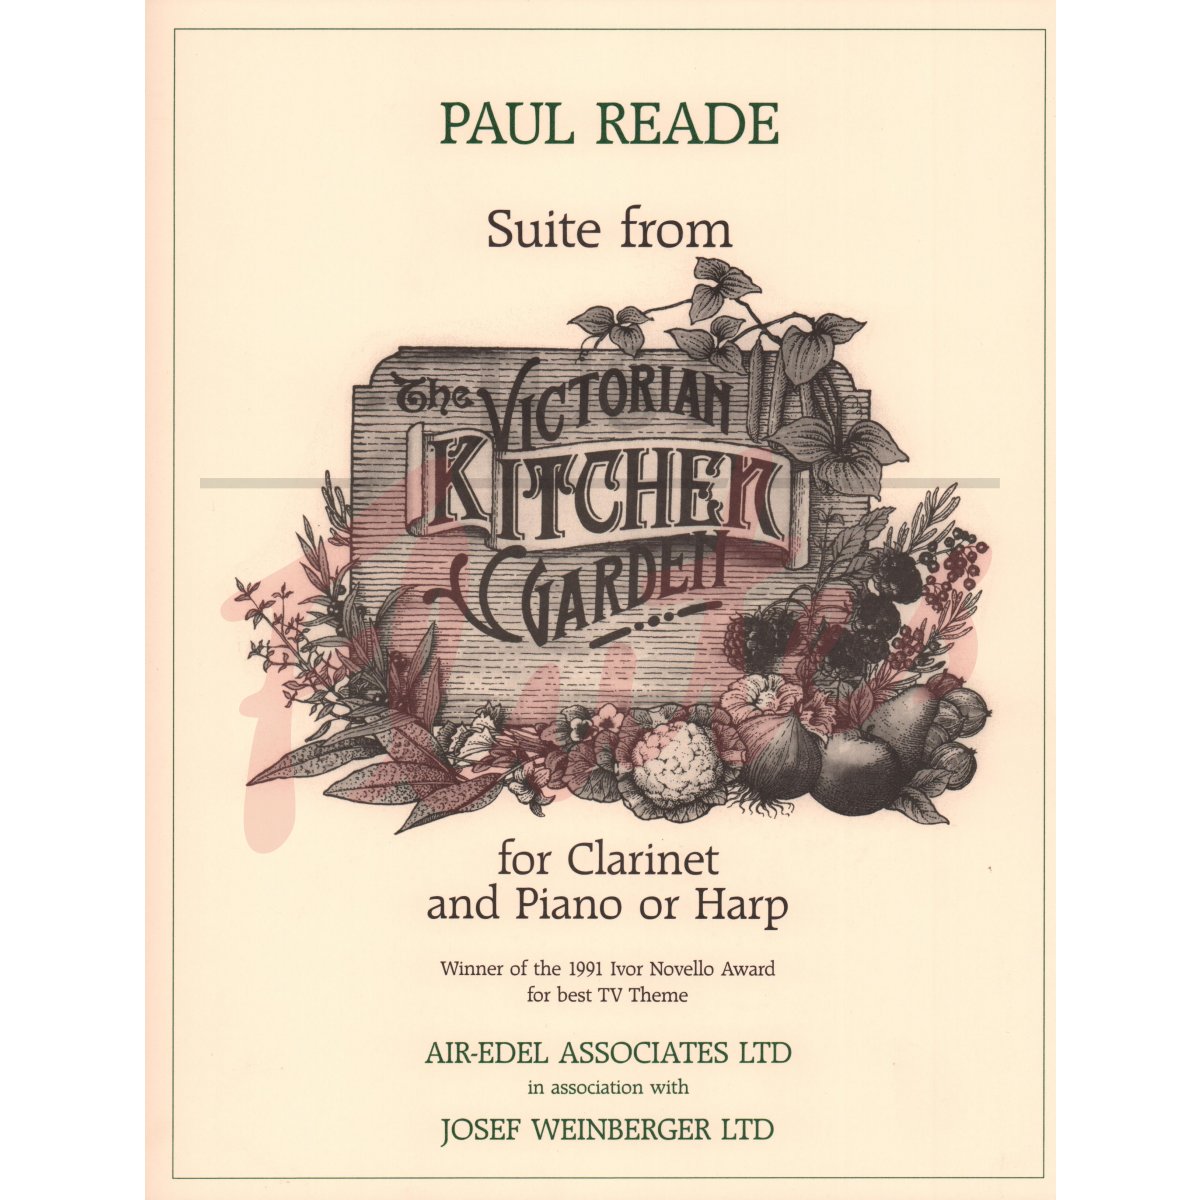 Suite from &#039;The Victorian Kitchen Garden&#039; for Clarinet and Piano (or harp)